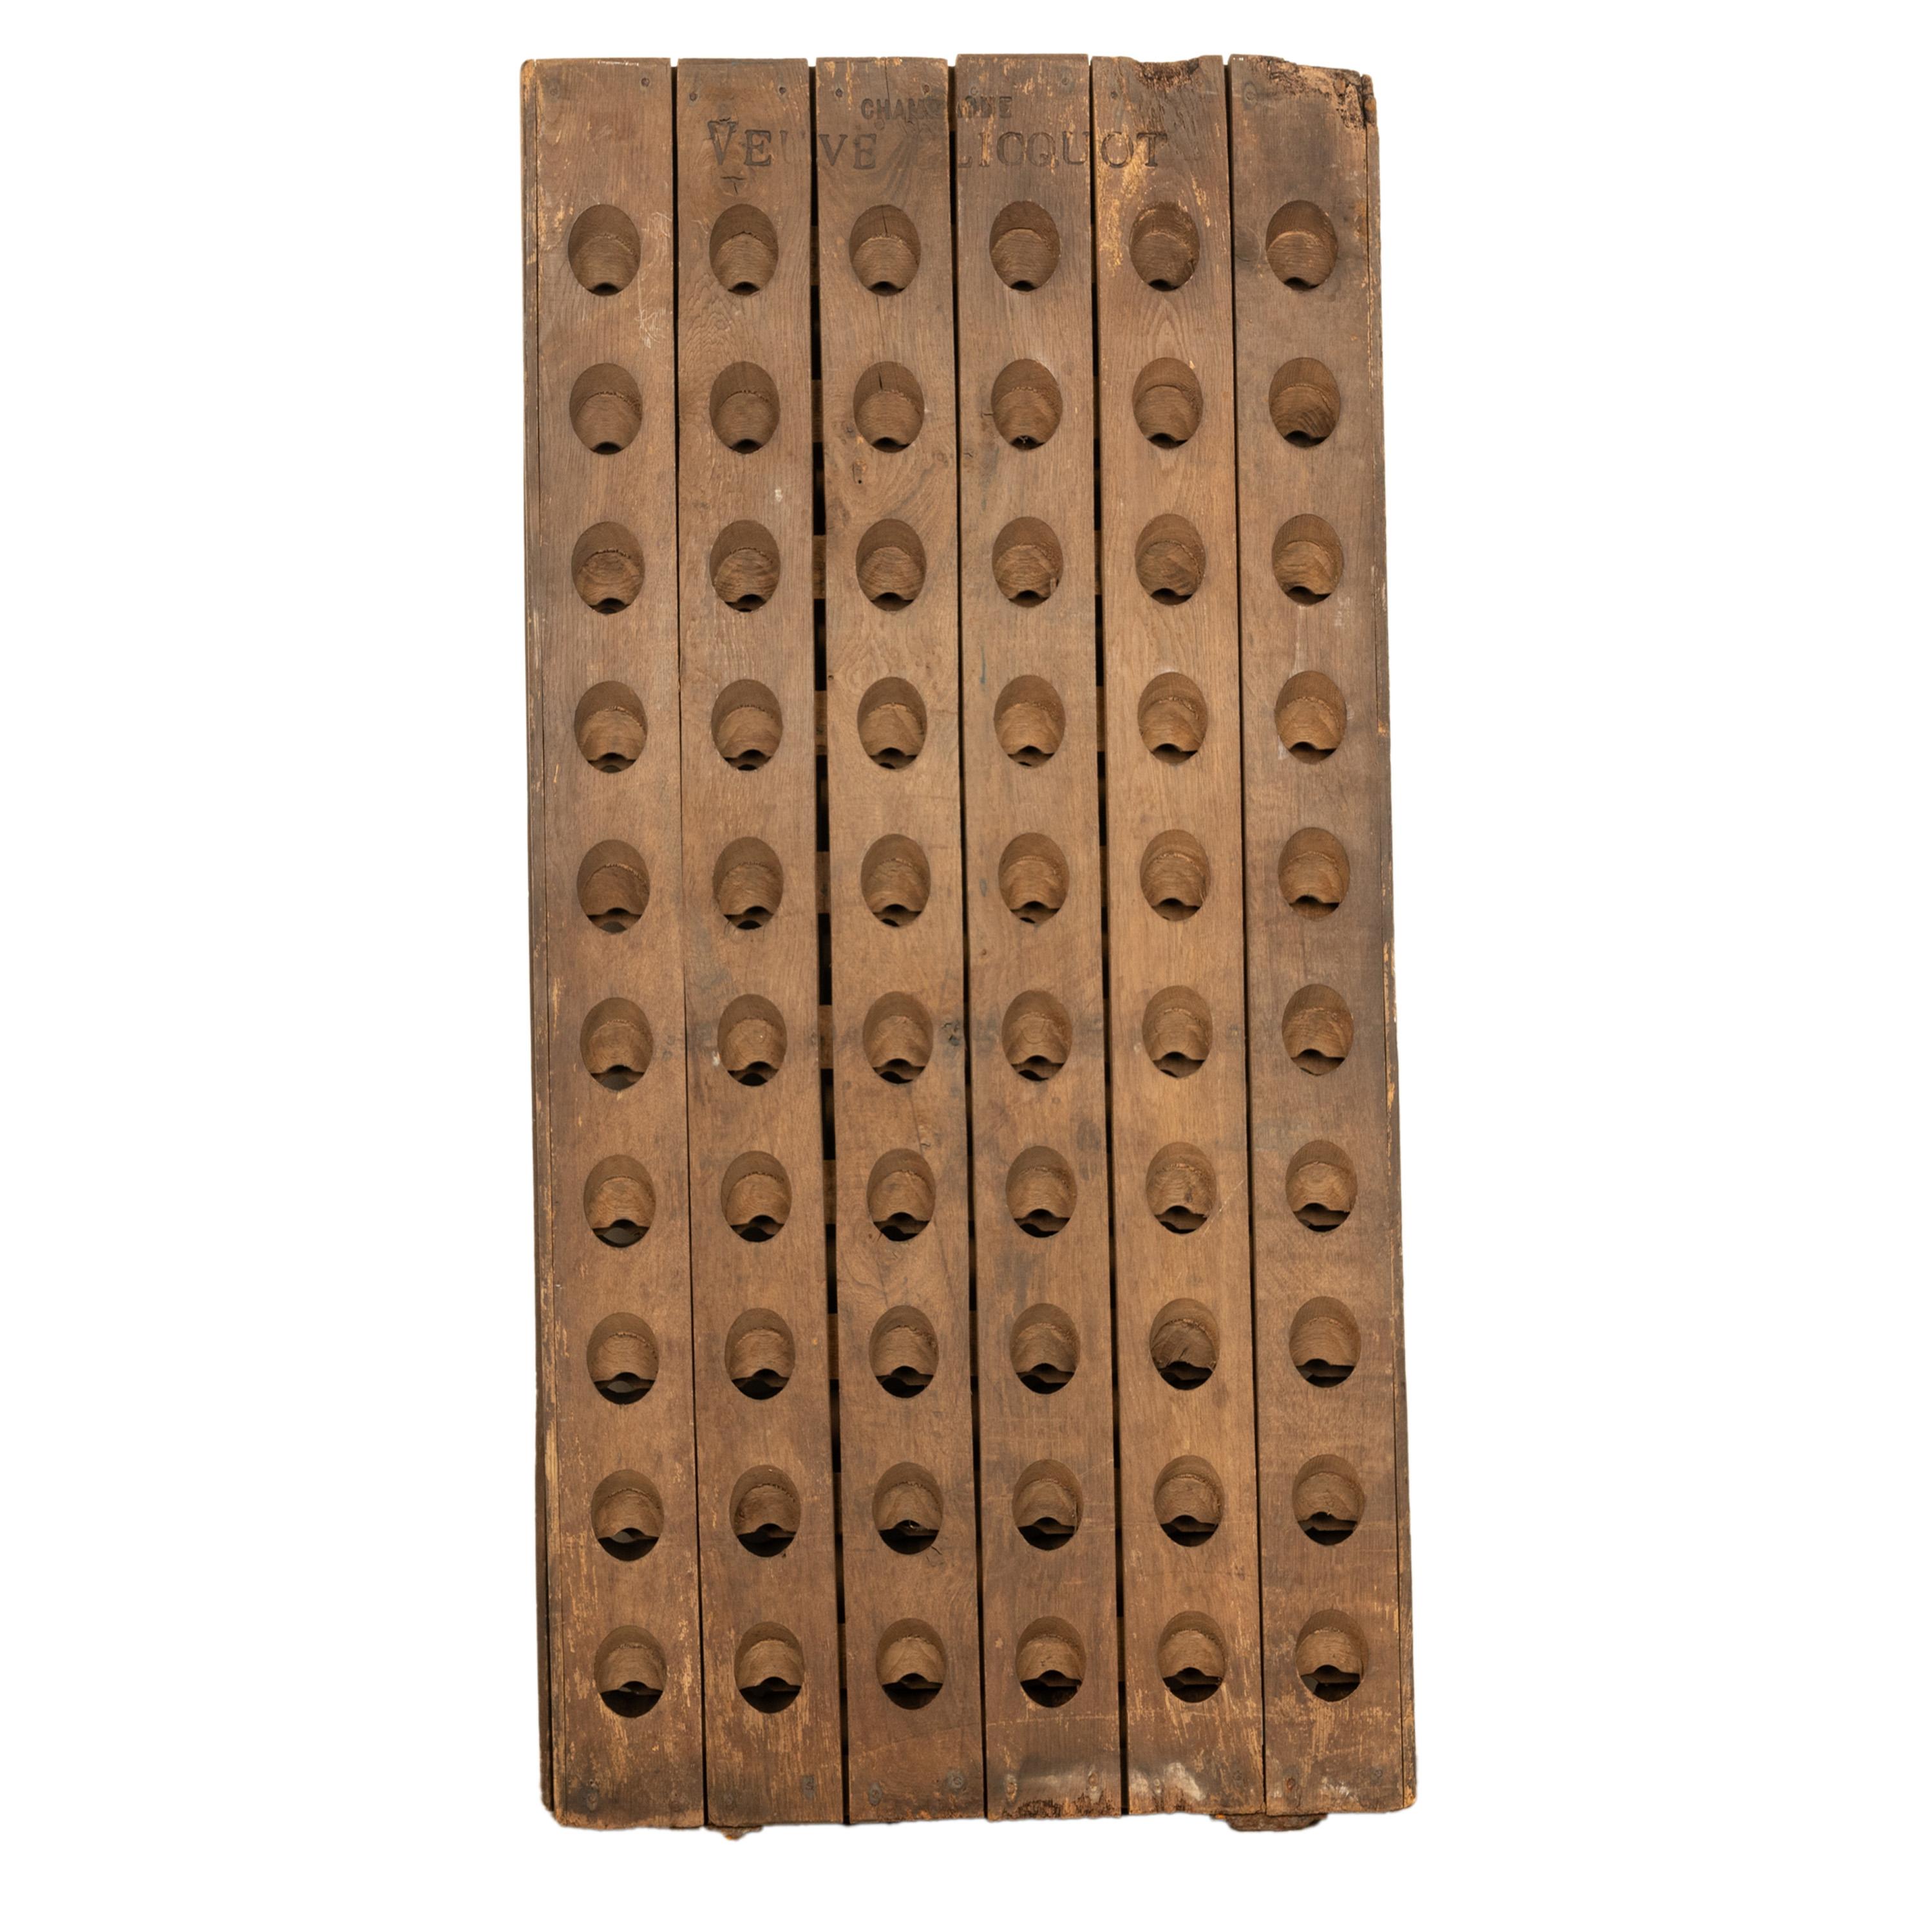 An antique late 19th century French Champagne riddling wine 120 bottle rack. 
An original 19th century champagne bottle riddling wine rack, the rack in an 'A' frame shape, it will hold 60 bottles on each side, so 120 bottles in total.
The rack has